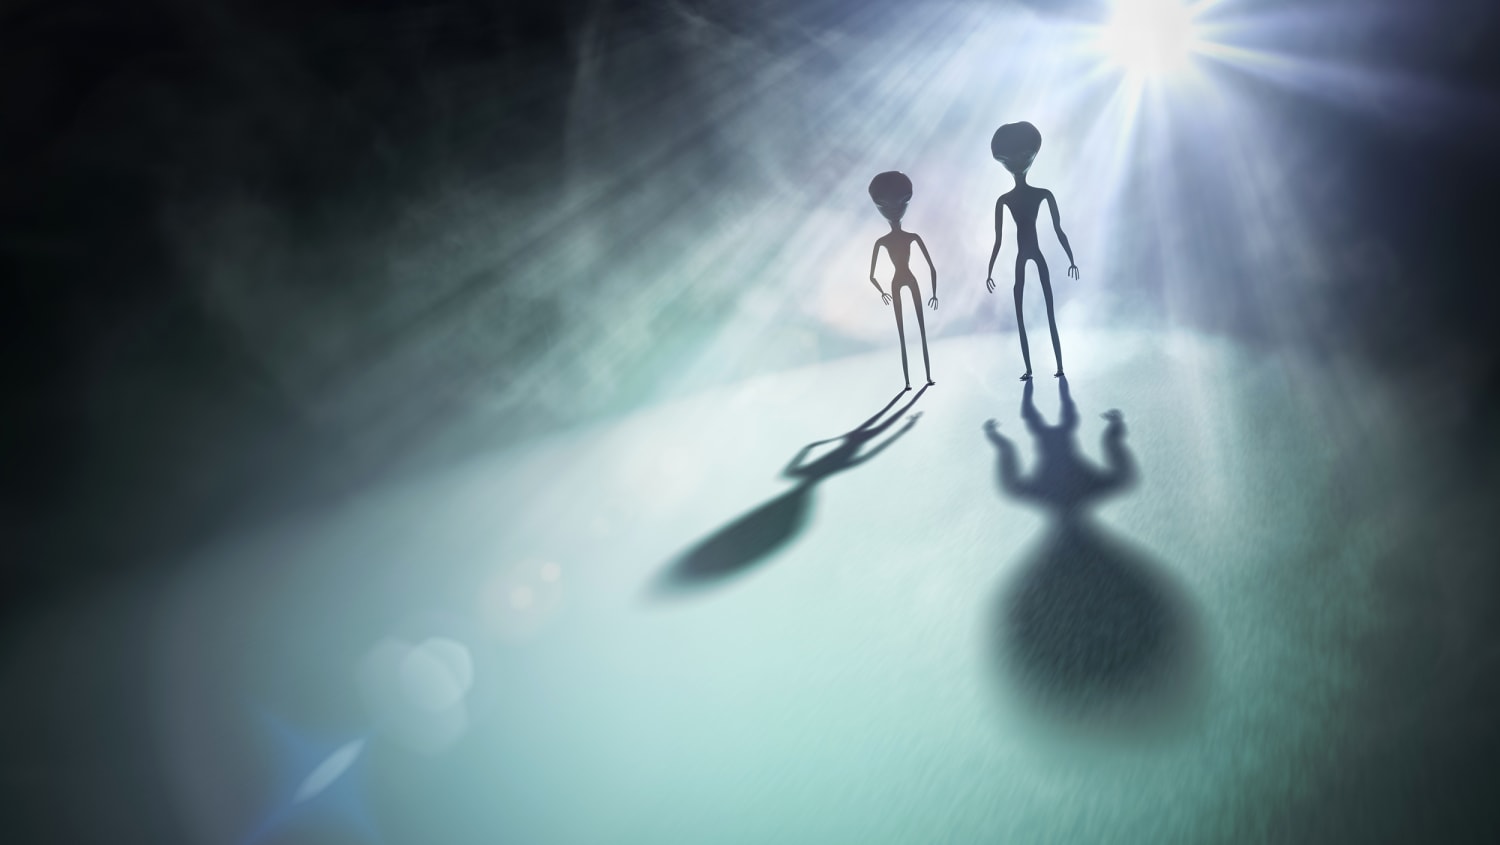 Zoo hypothesis' may explain why we haven't seen any space aliens